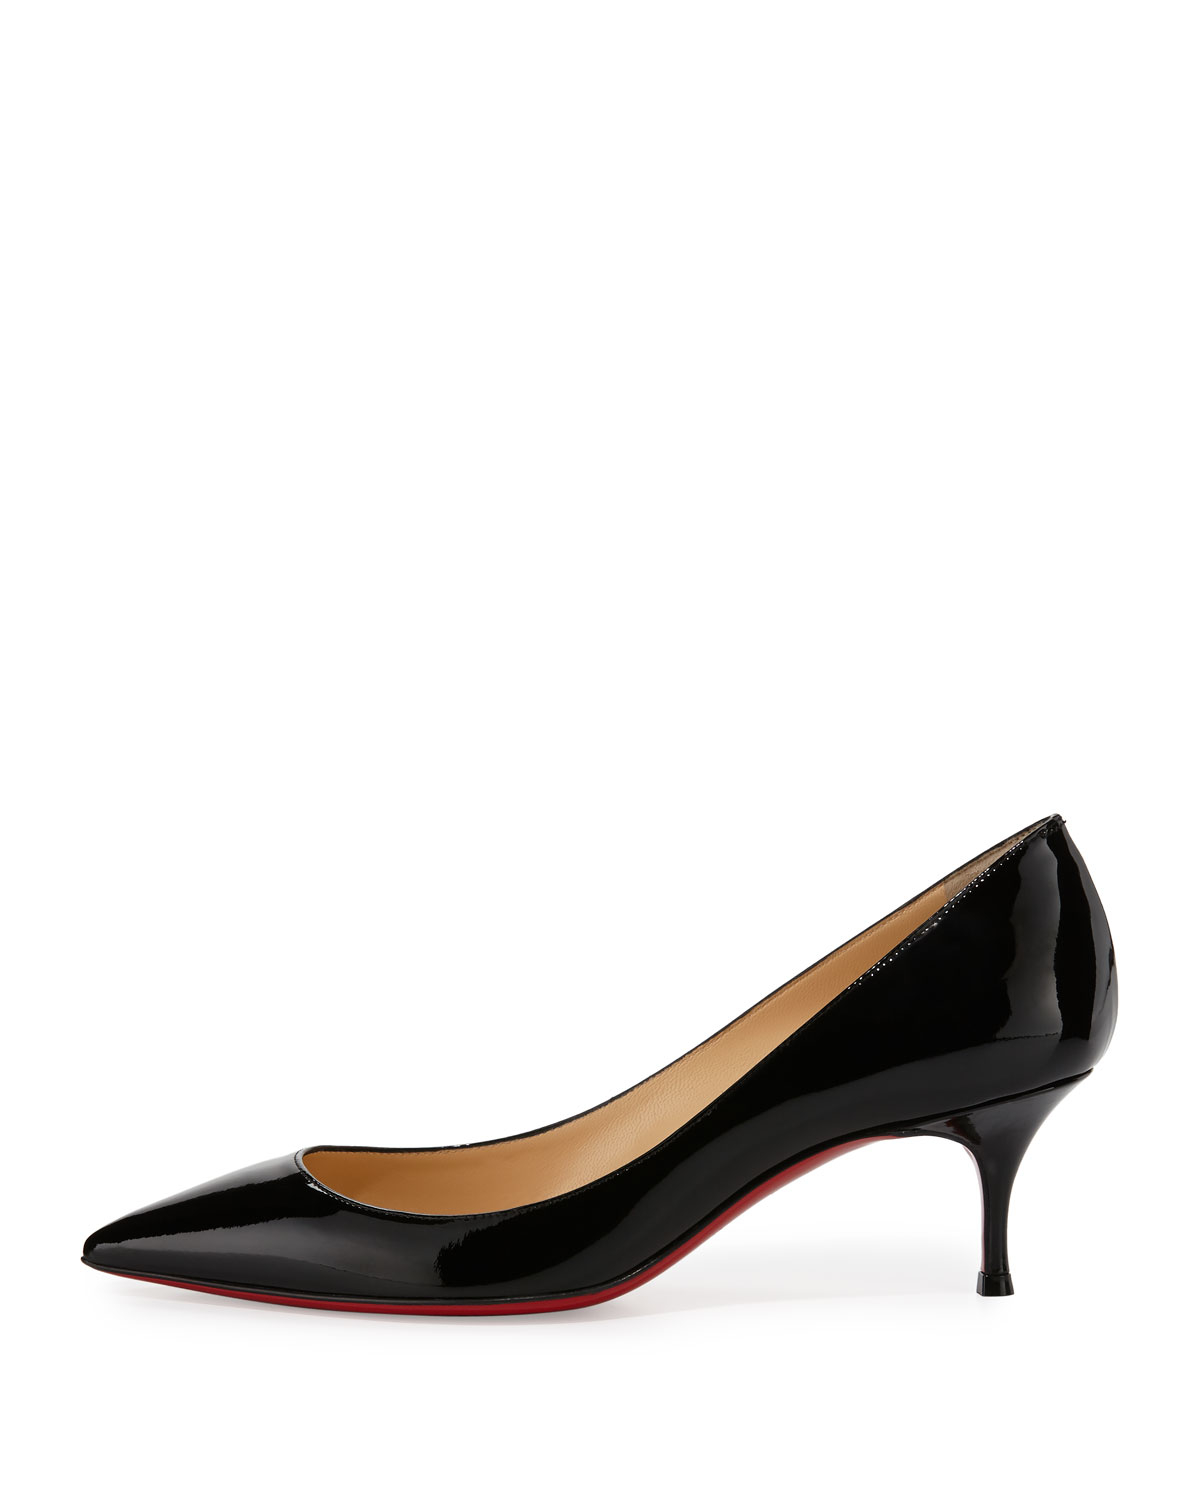 black loafers with gold spikes - Christian louboutin Pigalle Follies 55mm Patent Red Sole Pump in ...